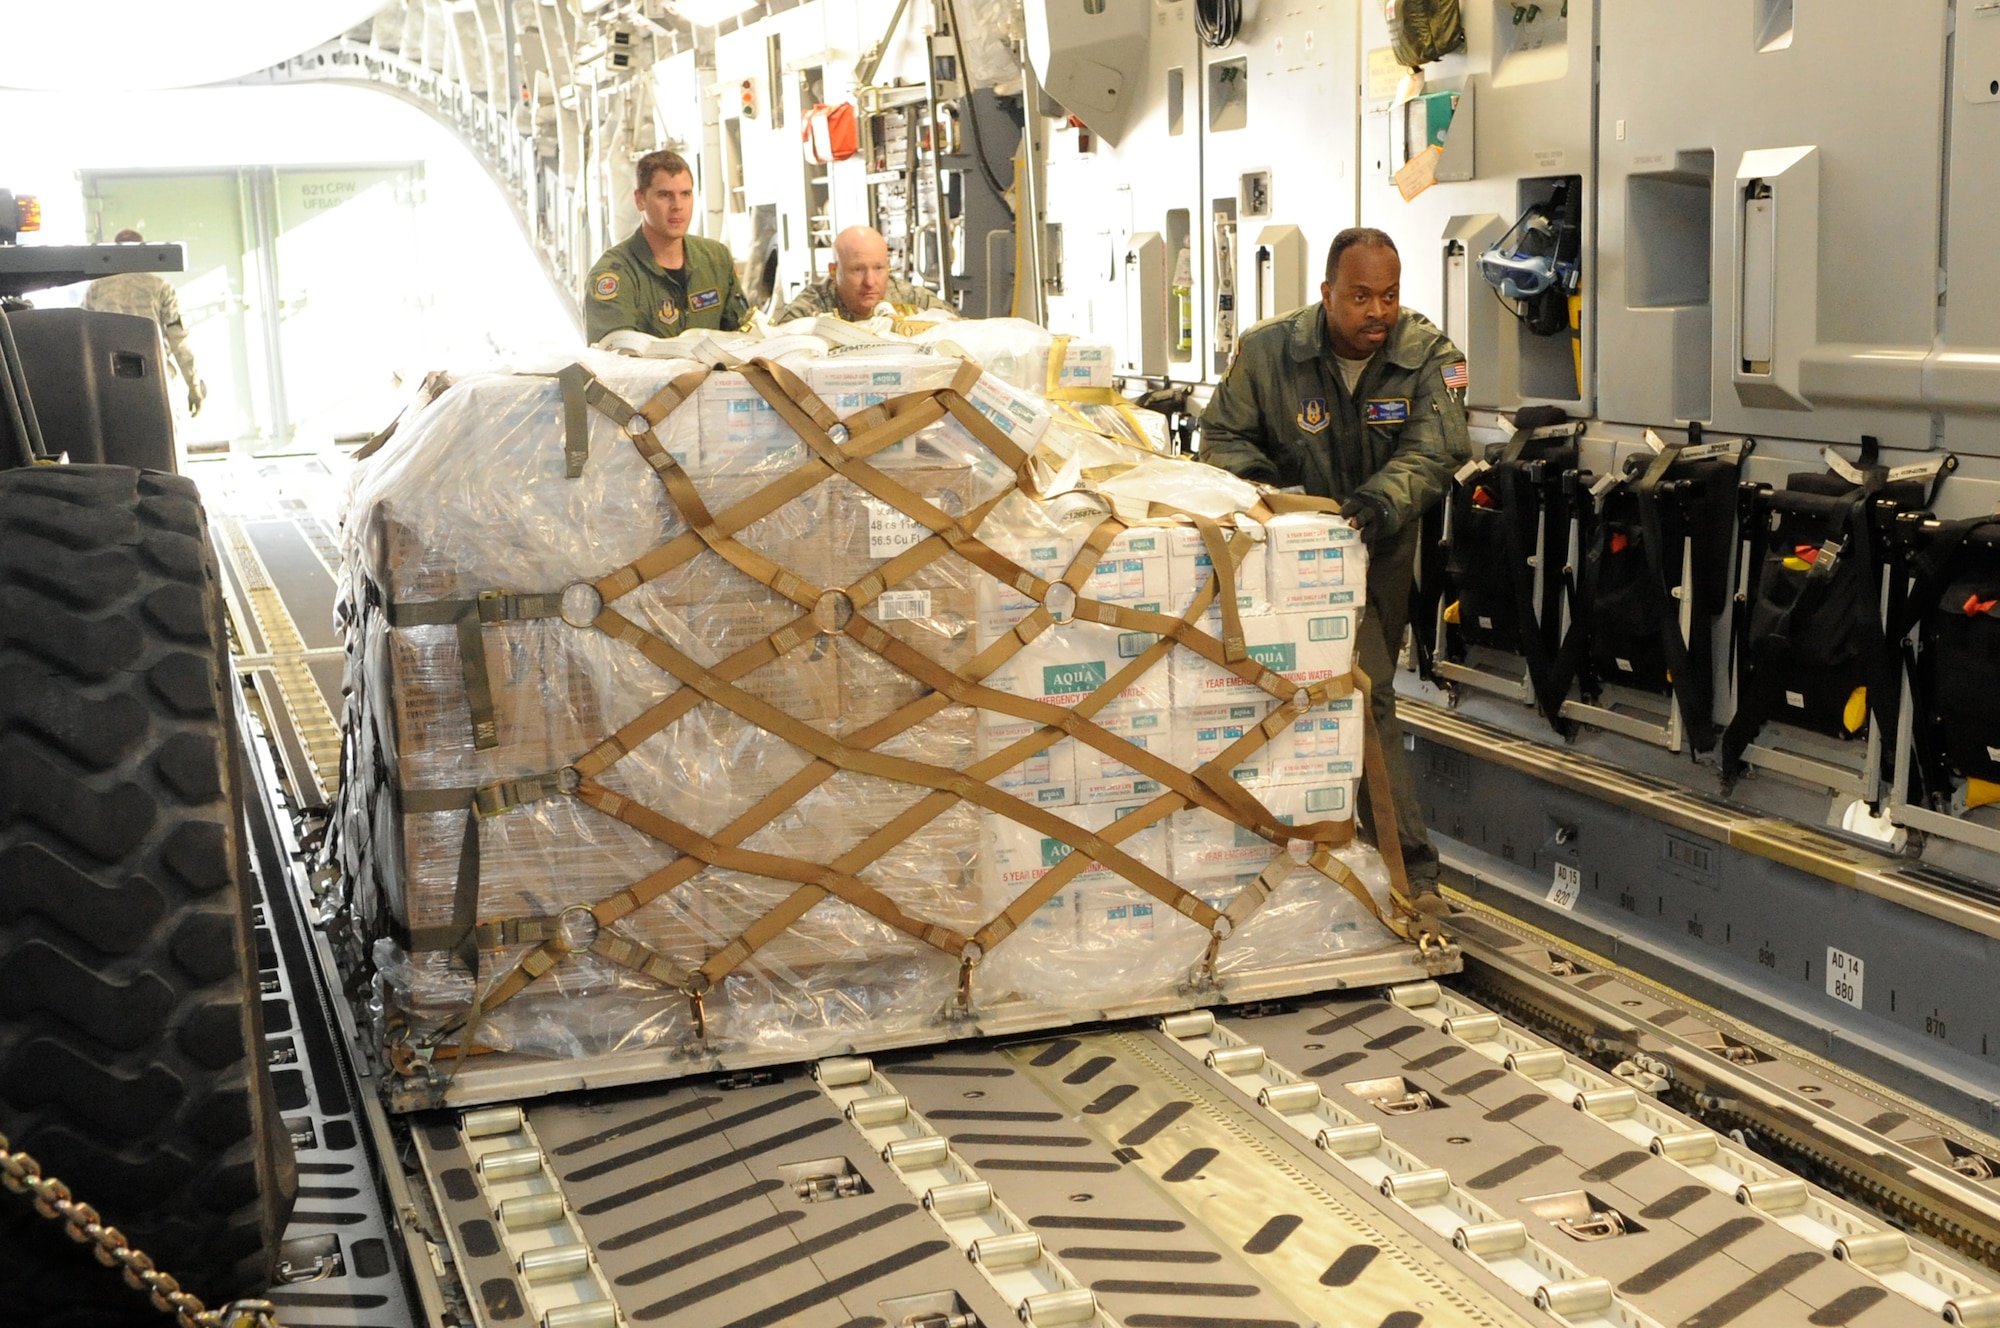 Airmen take the first step in providing relief supplies to Haiti Jan. 14, 2010, at Joint Base McGuire-Dix-Lakehurst. Together, they loaded bottles of water and other relief supplies on a C-17 Globemaster III in support of Haiti humanitarian relief operations. (U.S. Air Force photo/Charles Russell)